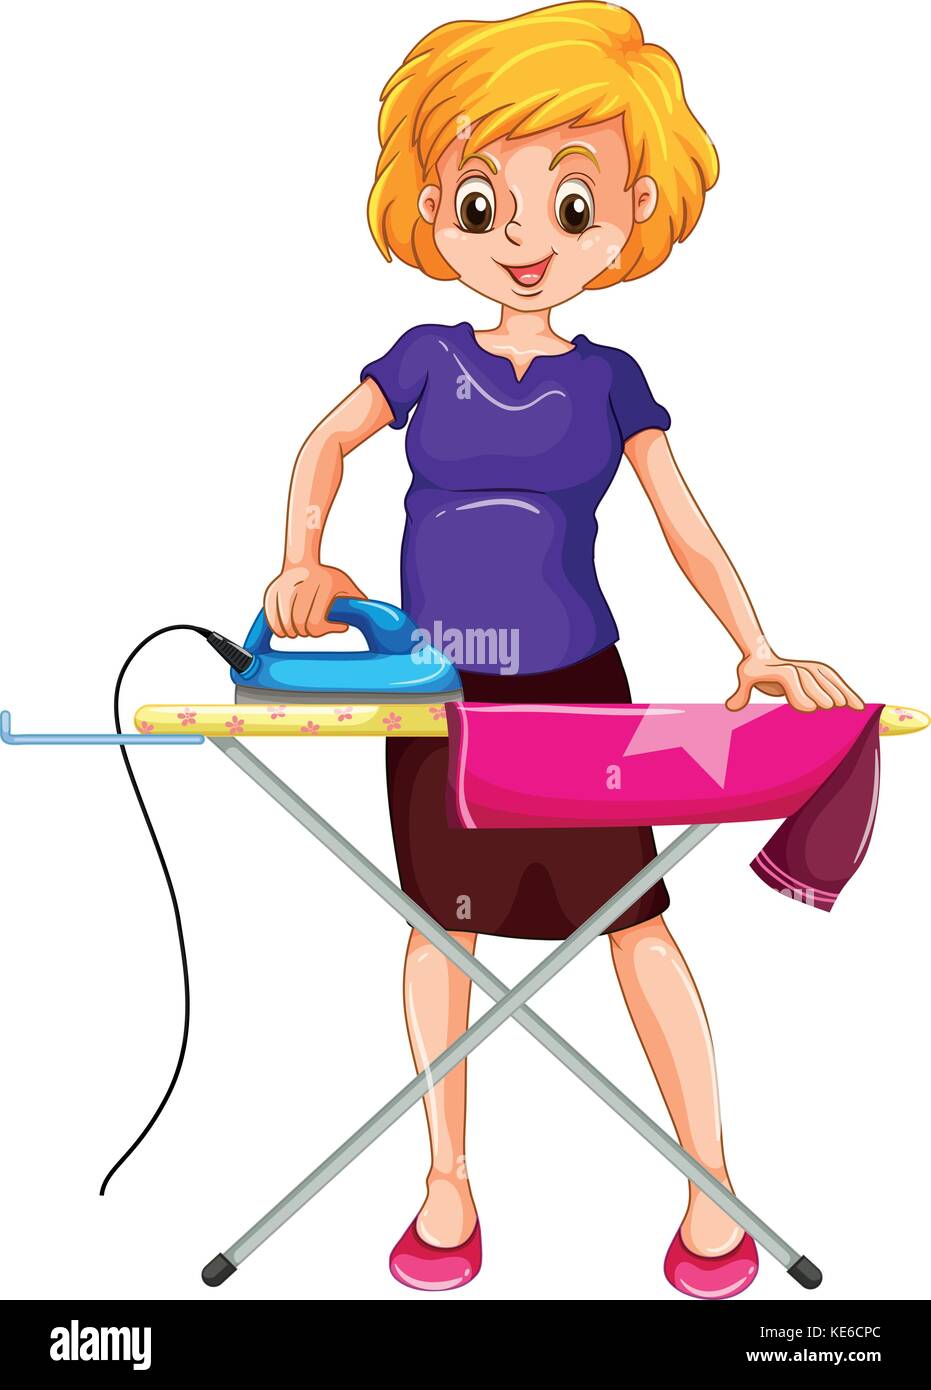 Woman ironing clothes on the ironing board illustration Stock Vector